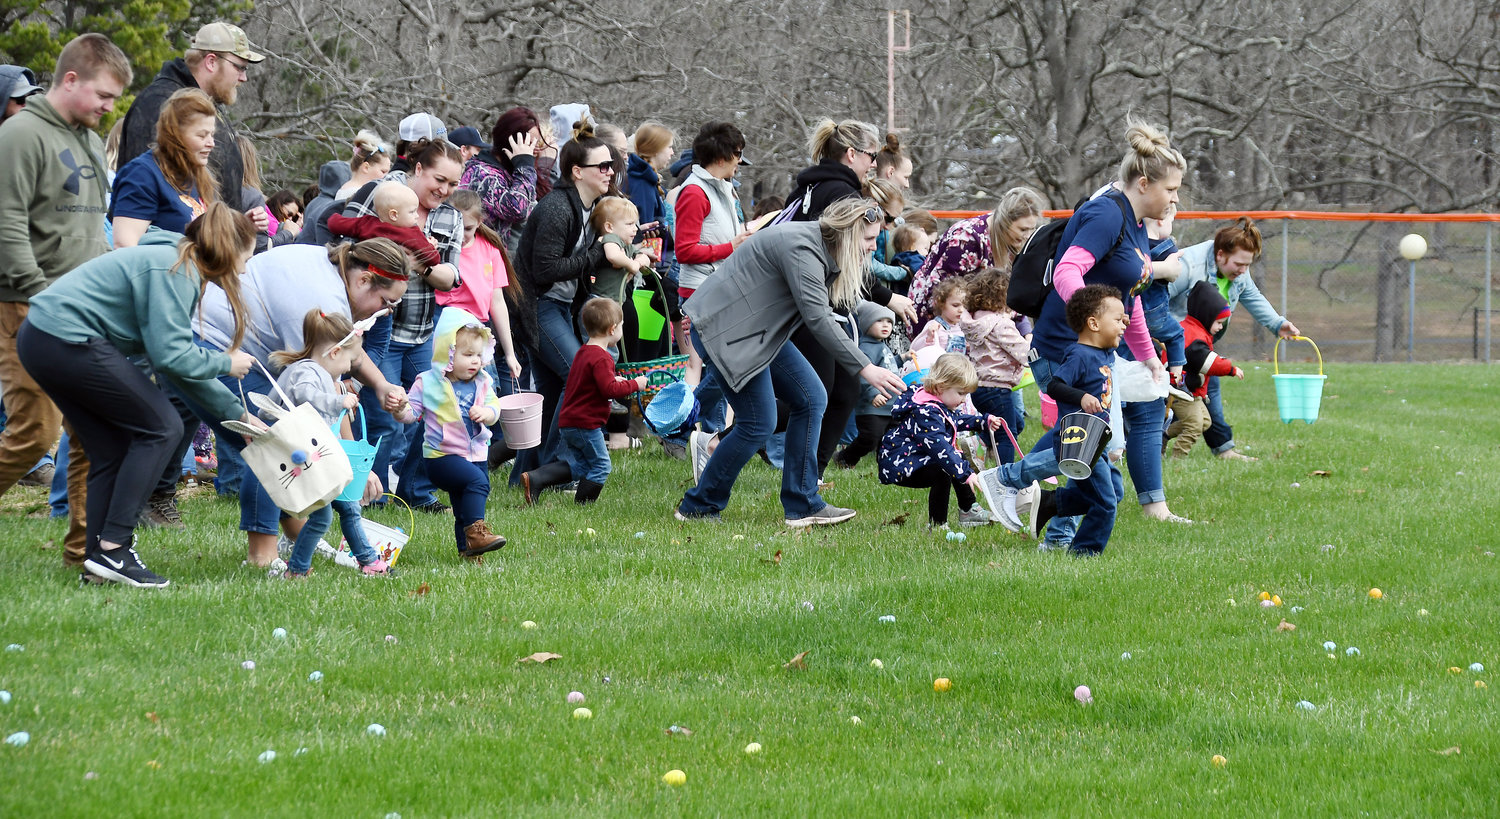 The youngest of the children move off the Memorial Field infield into an outfield well stocked with plastic eggs, some containing special prize baskets provided by supporters of the project.